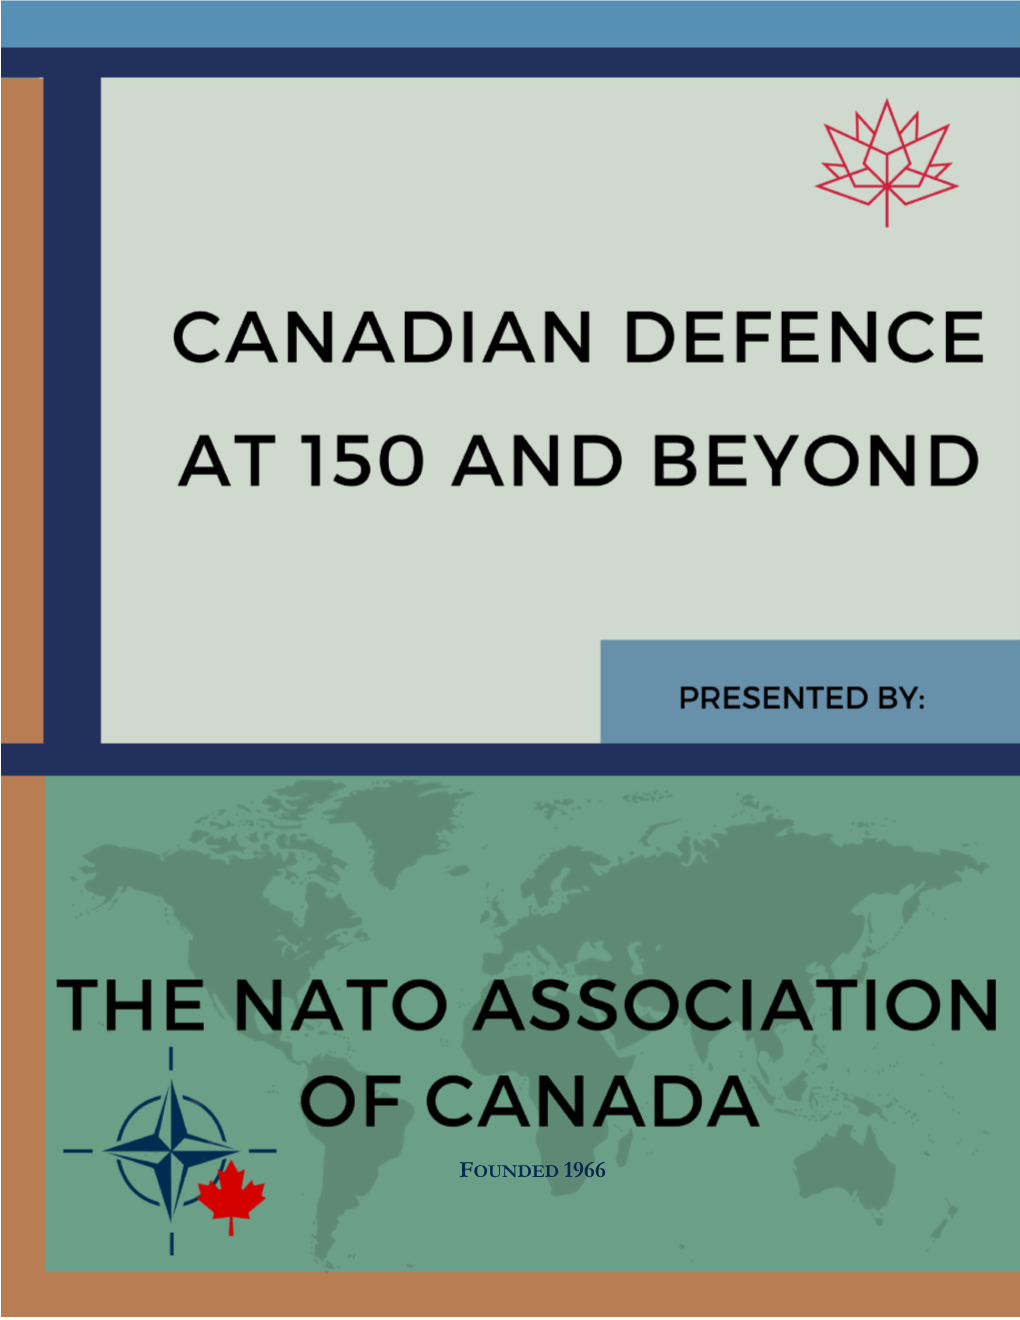 © NATO Association of Canada FOUNDED 1966